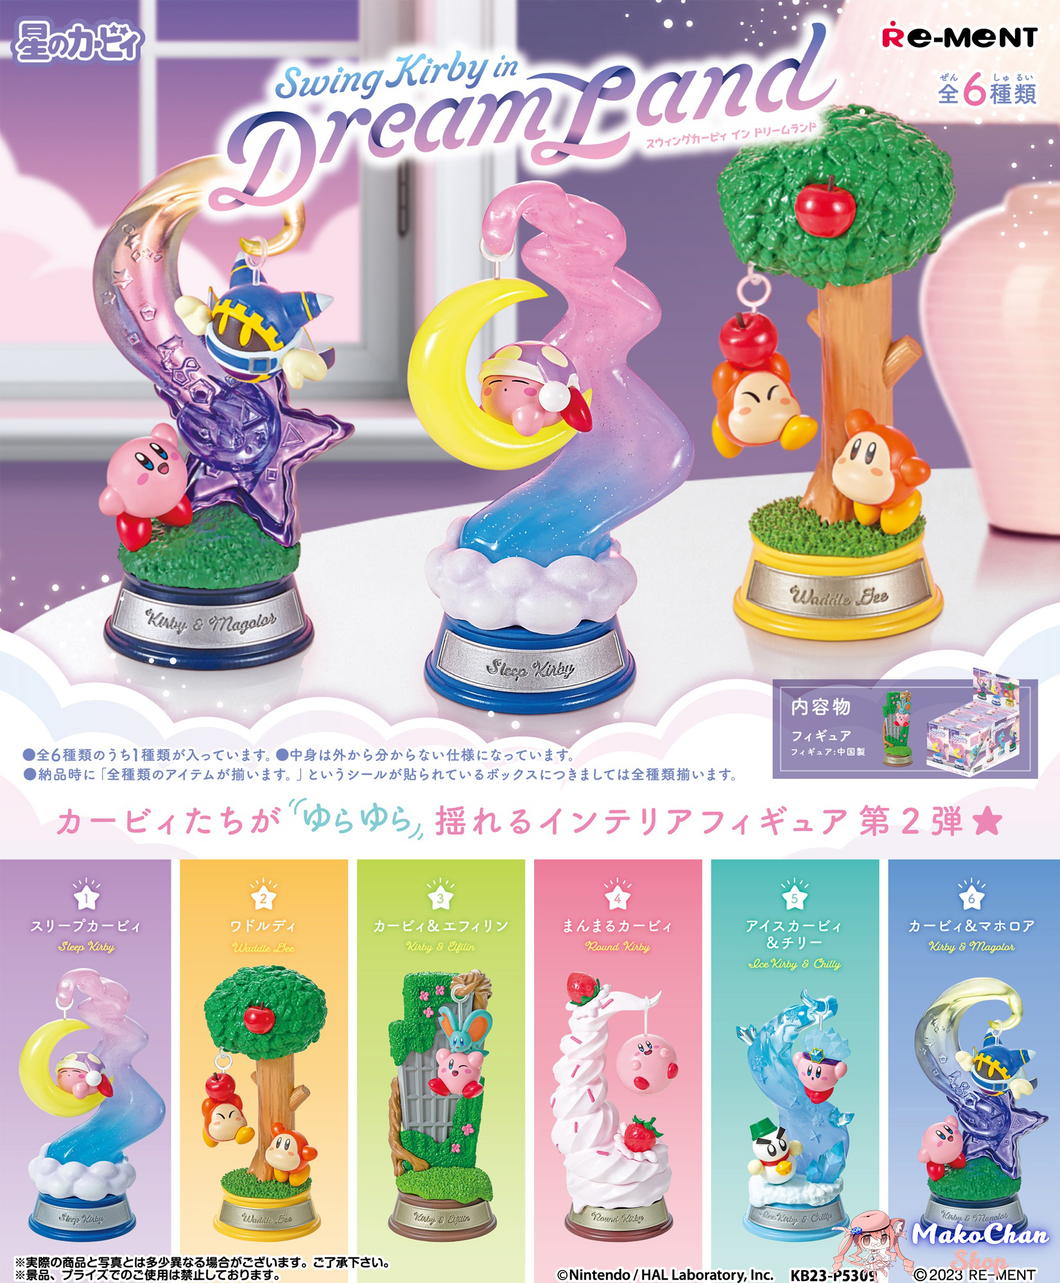 Re-ment: Swing Kirby in Dream Land (pre -order)